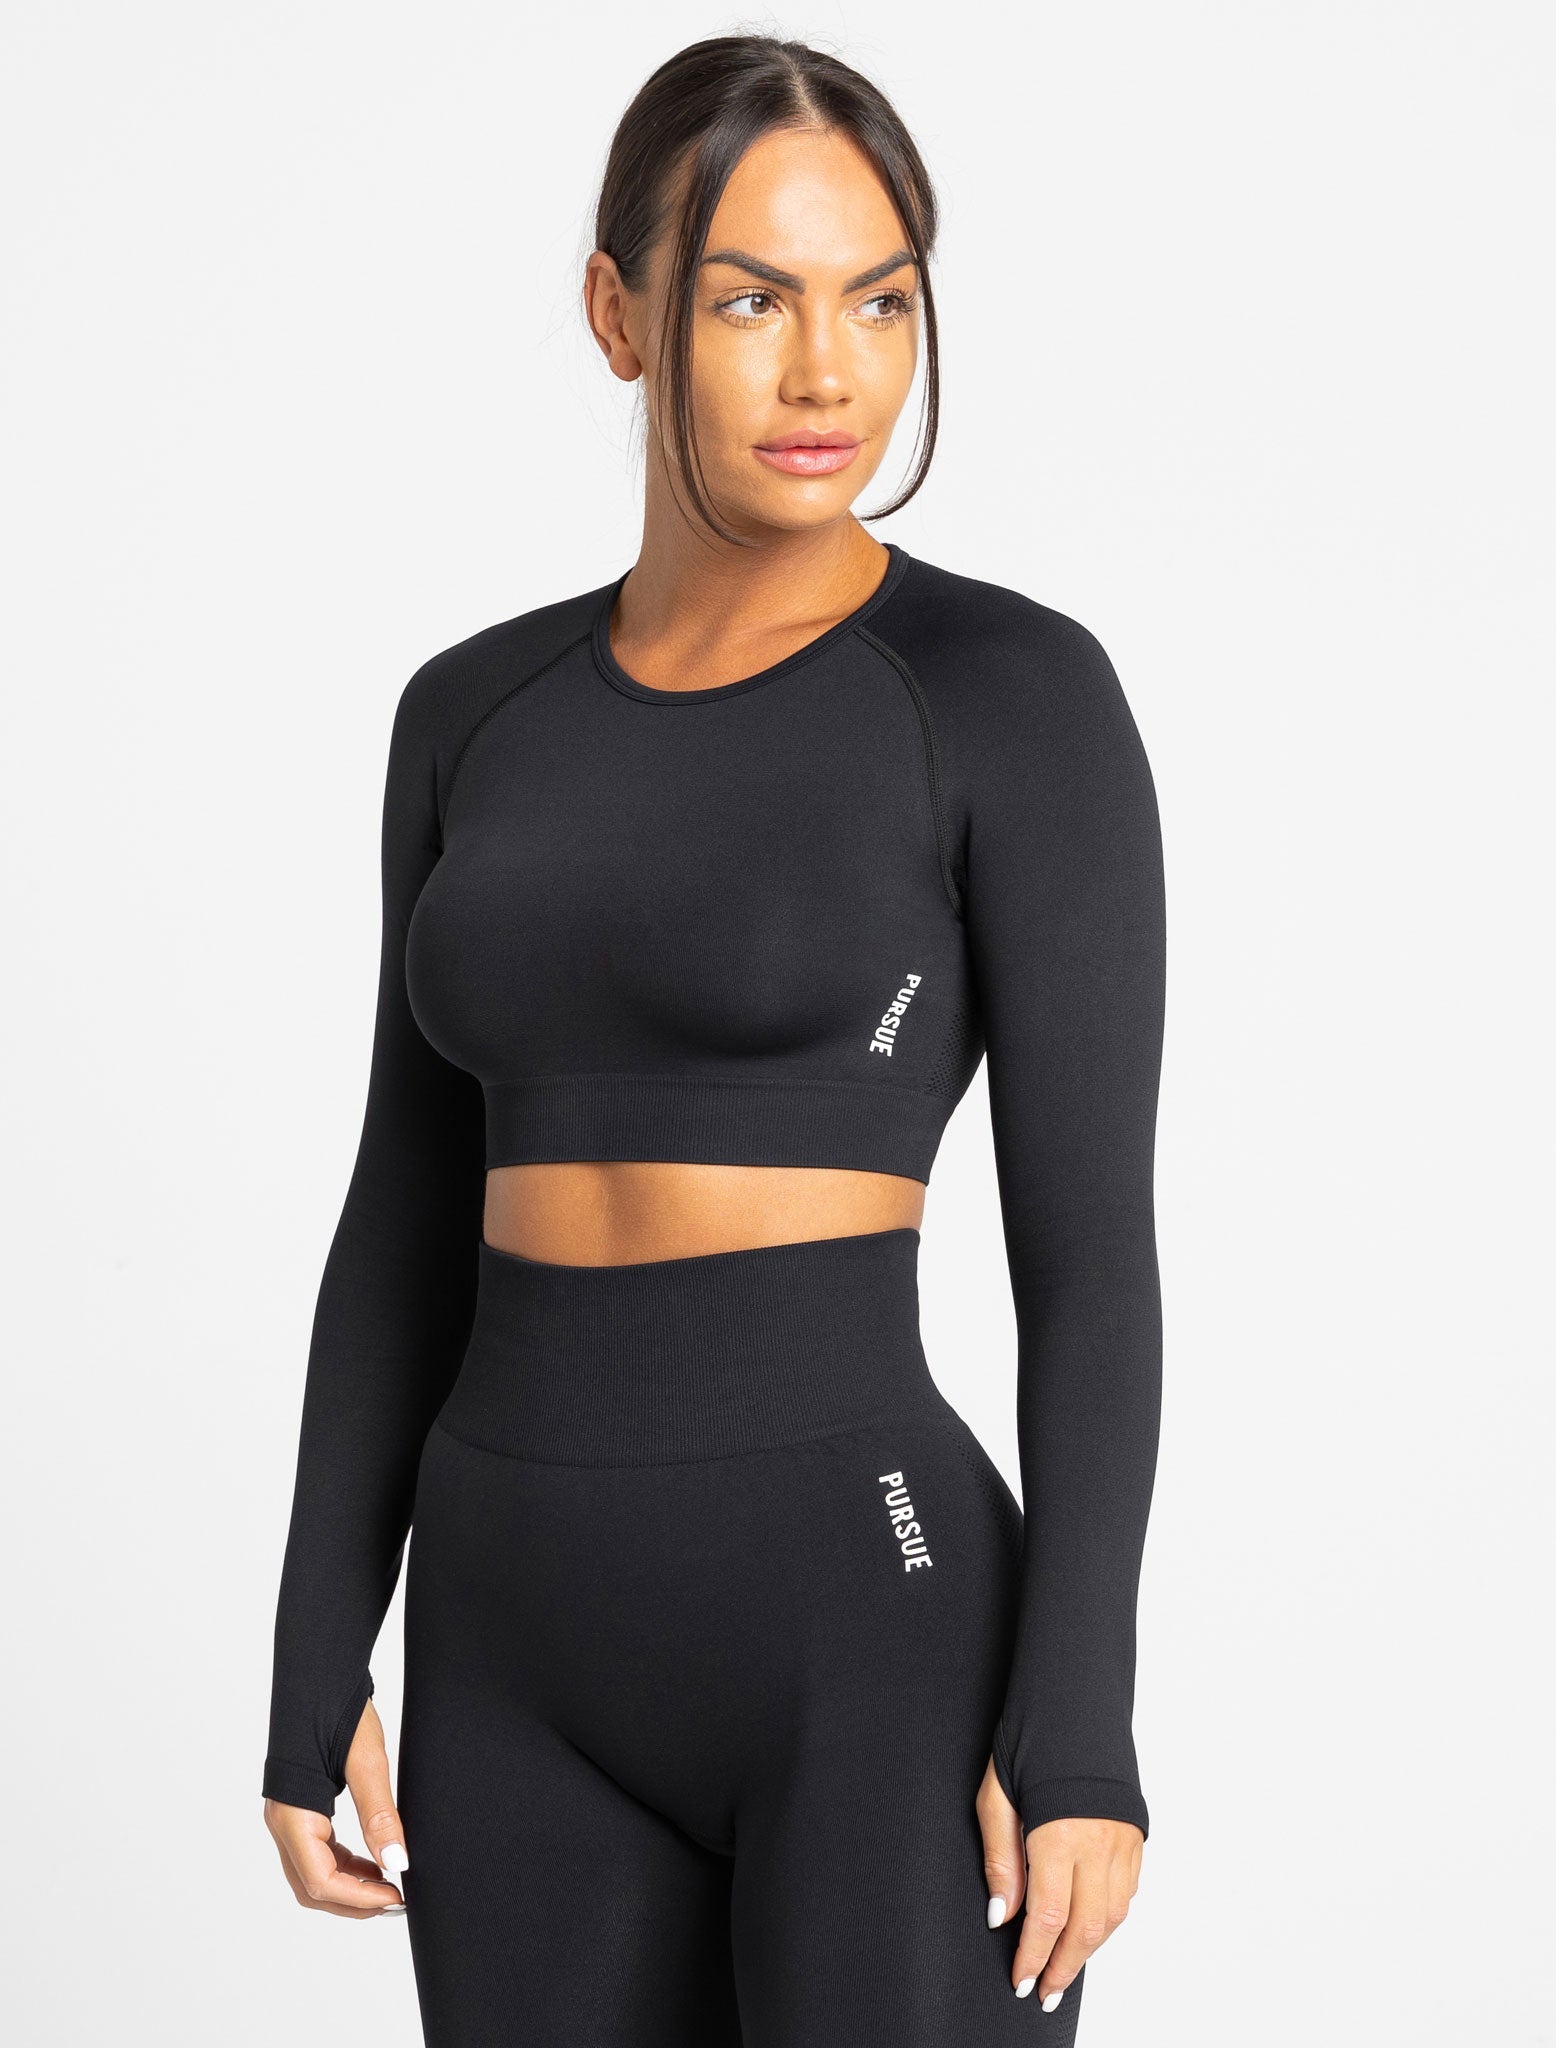 Move Seamless Long Sleeve Crop Top / Black Pursue Fitness 6